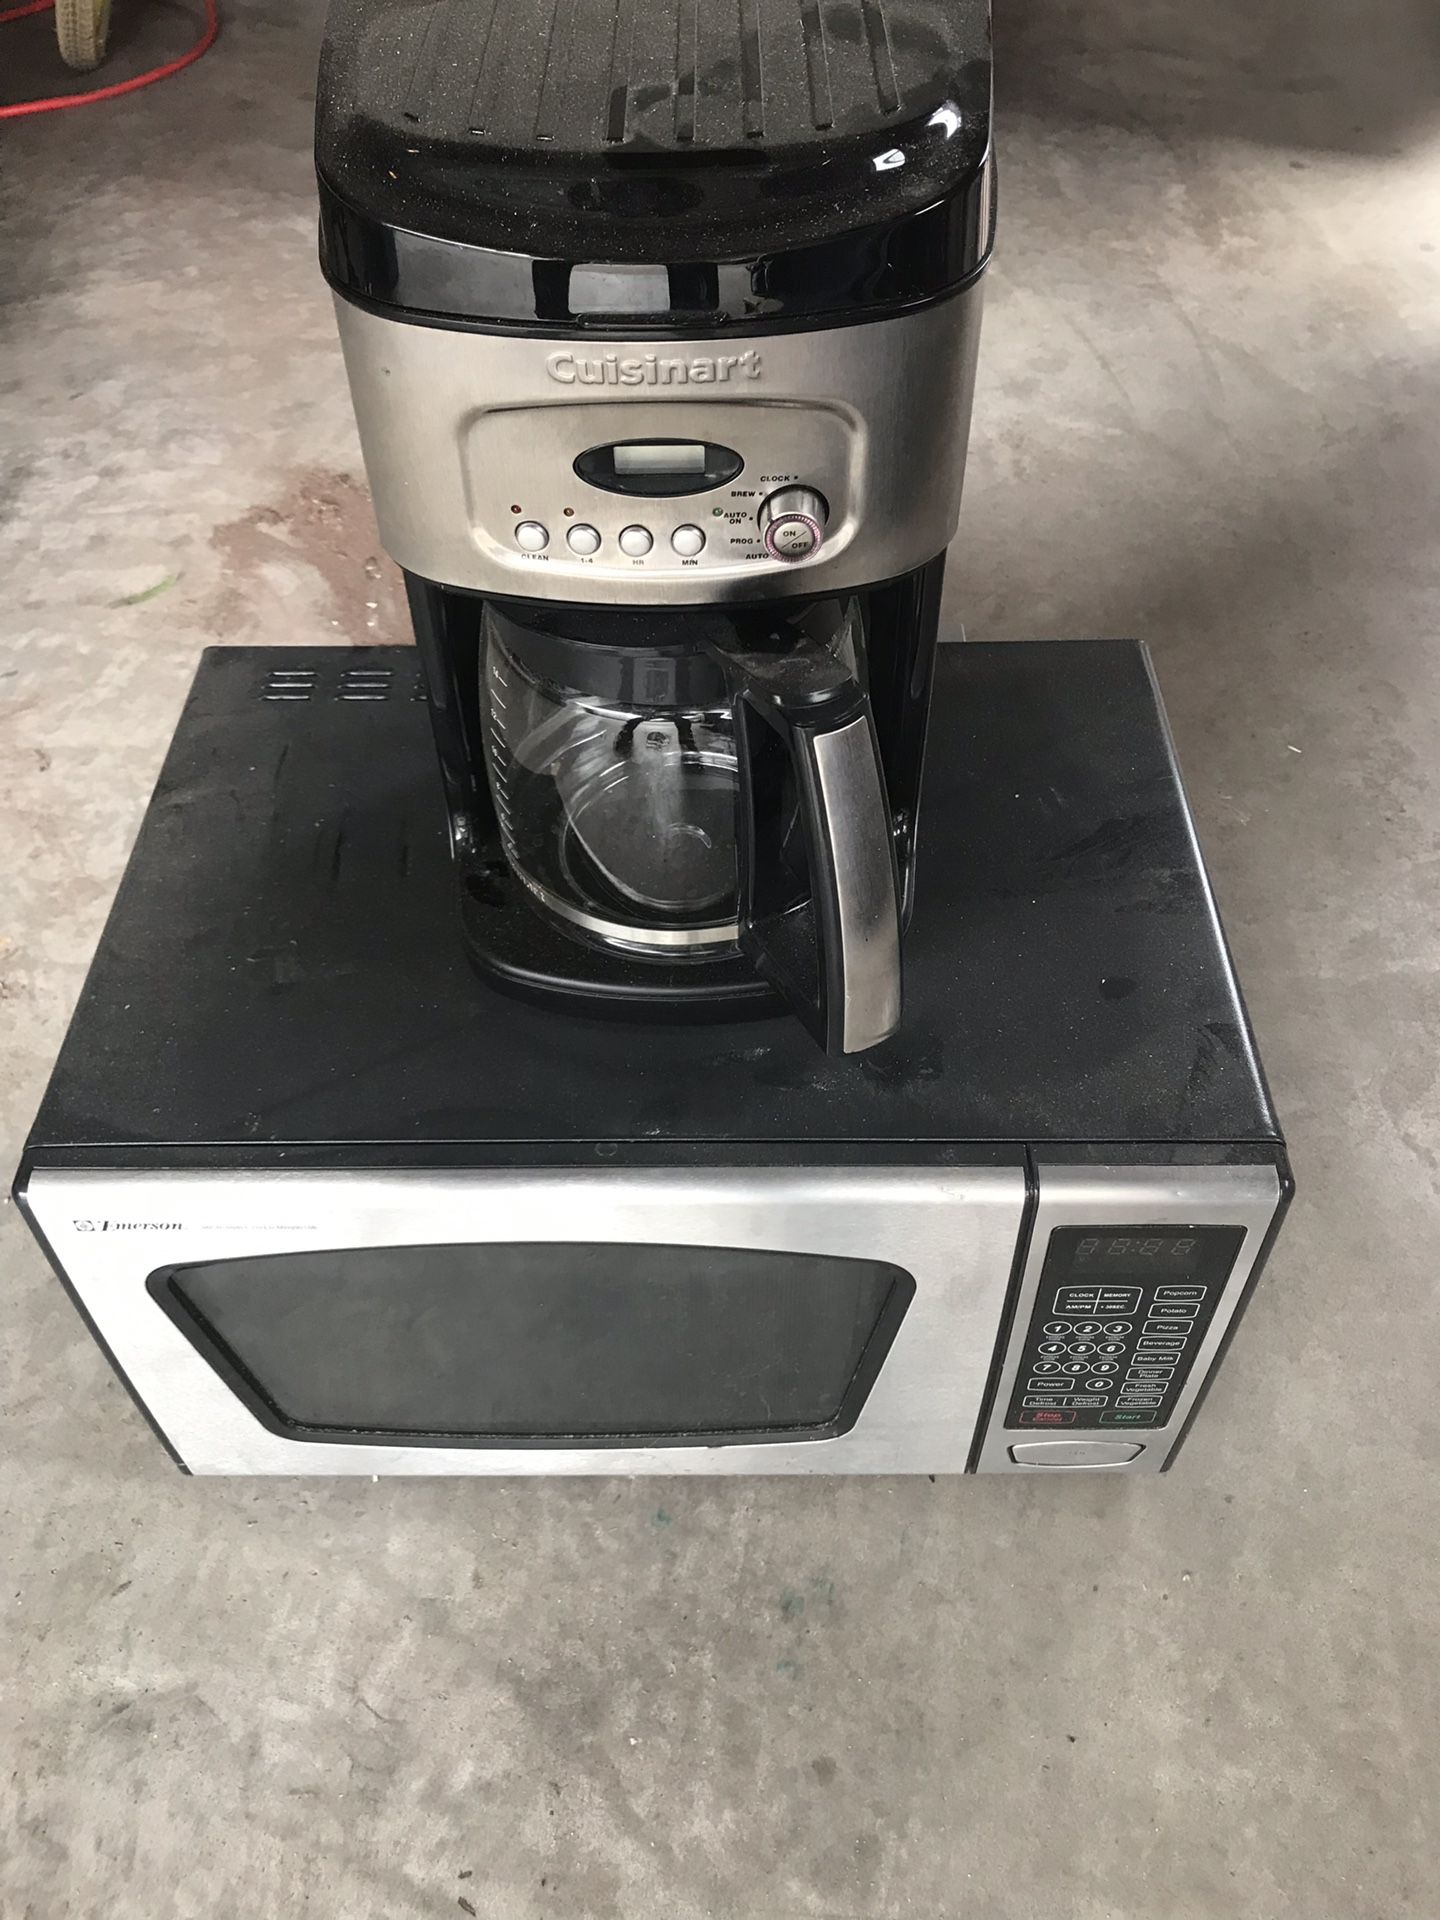 Cuisinart coffee pot and Emerson microwave